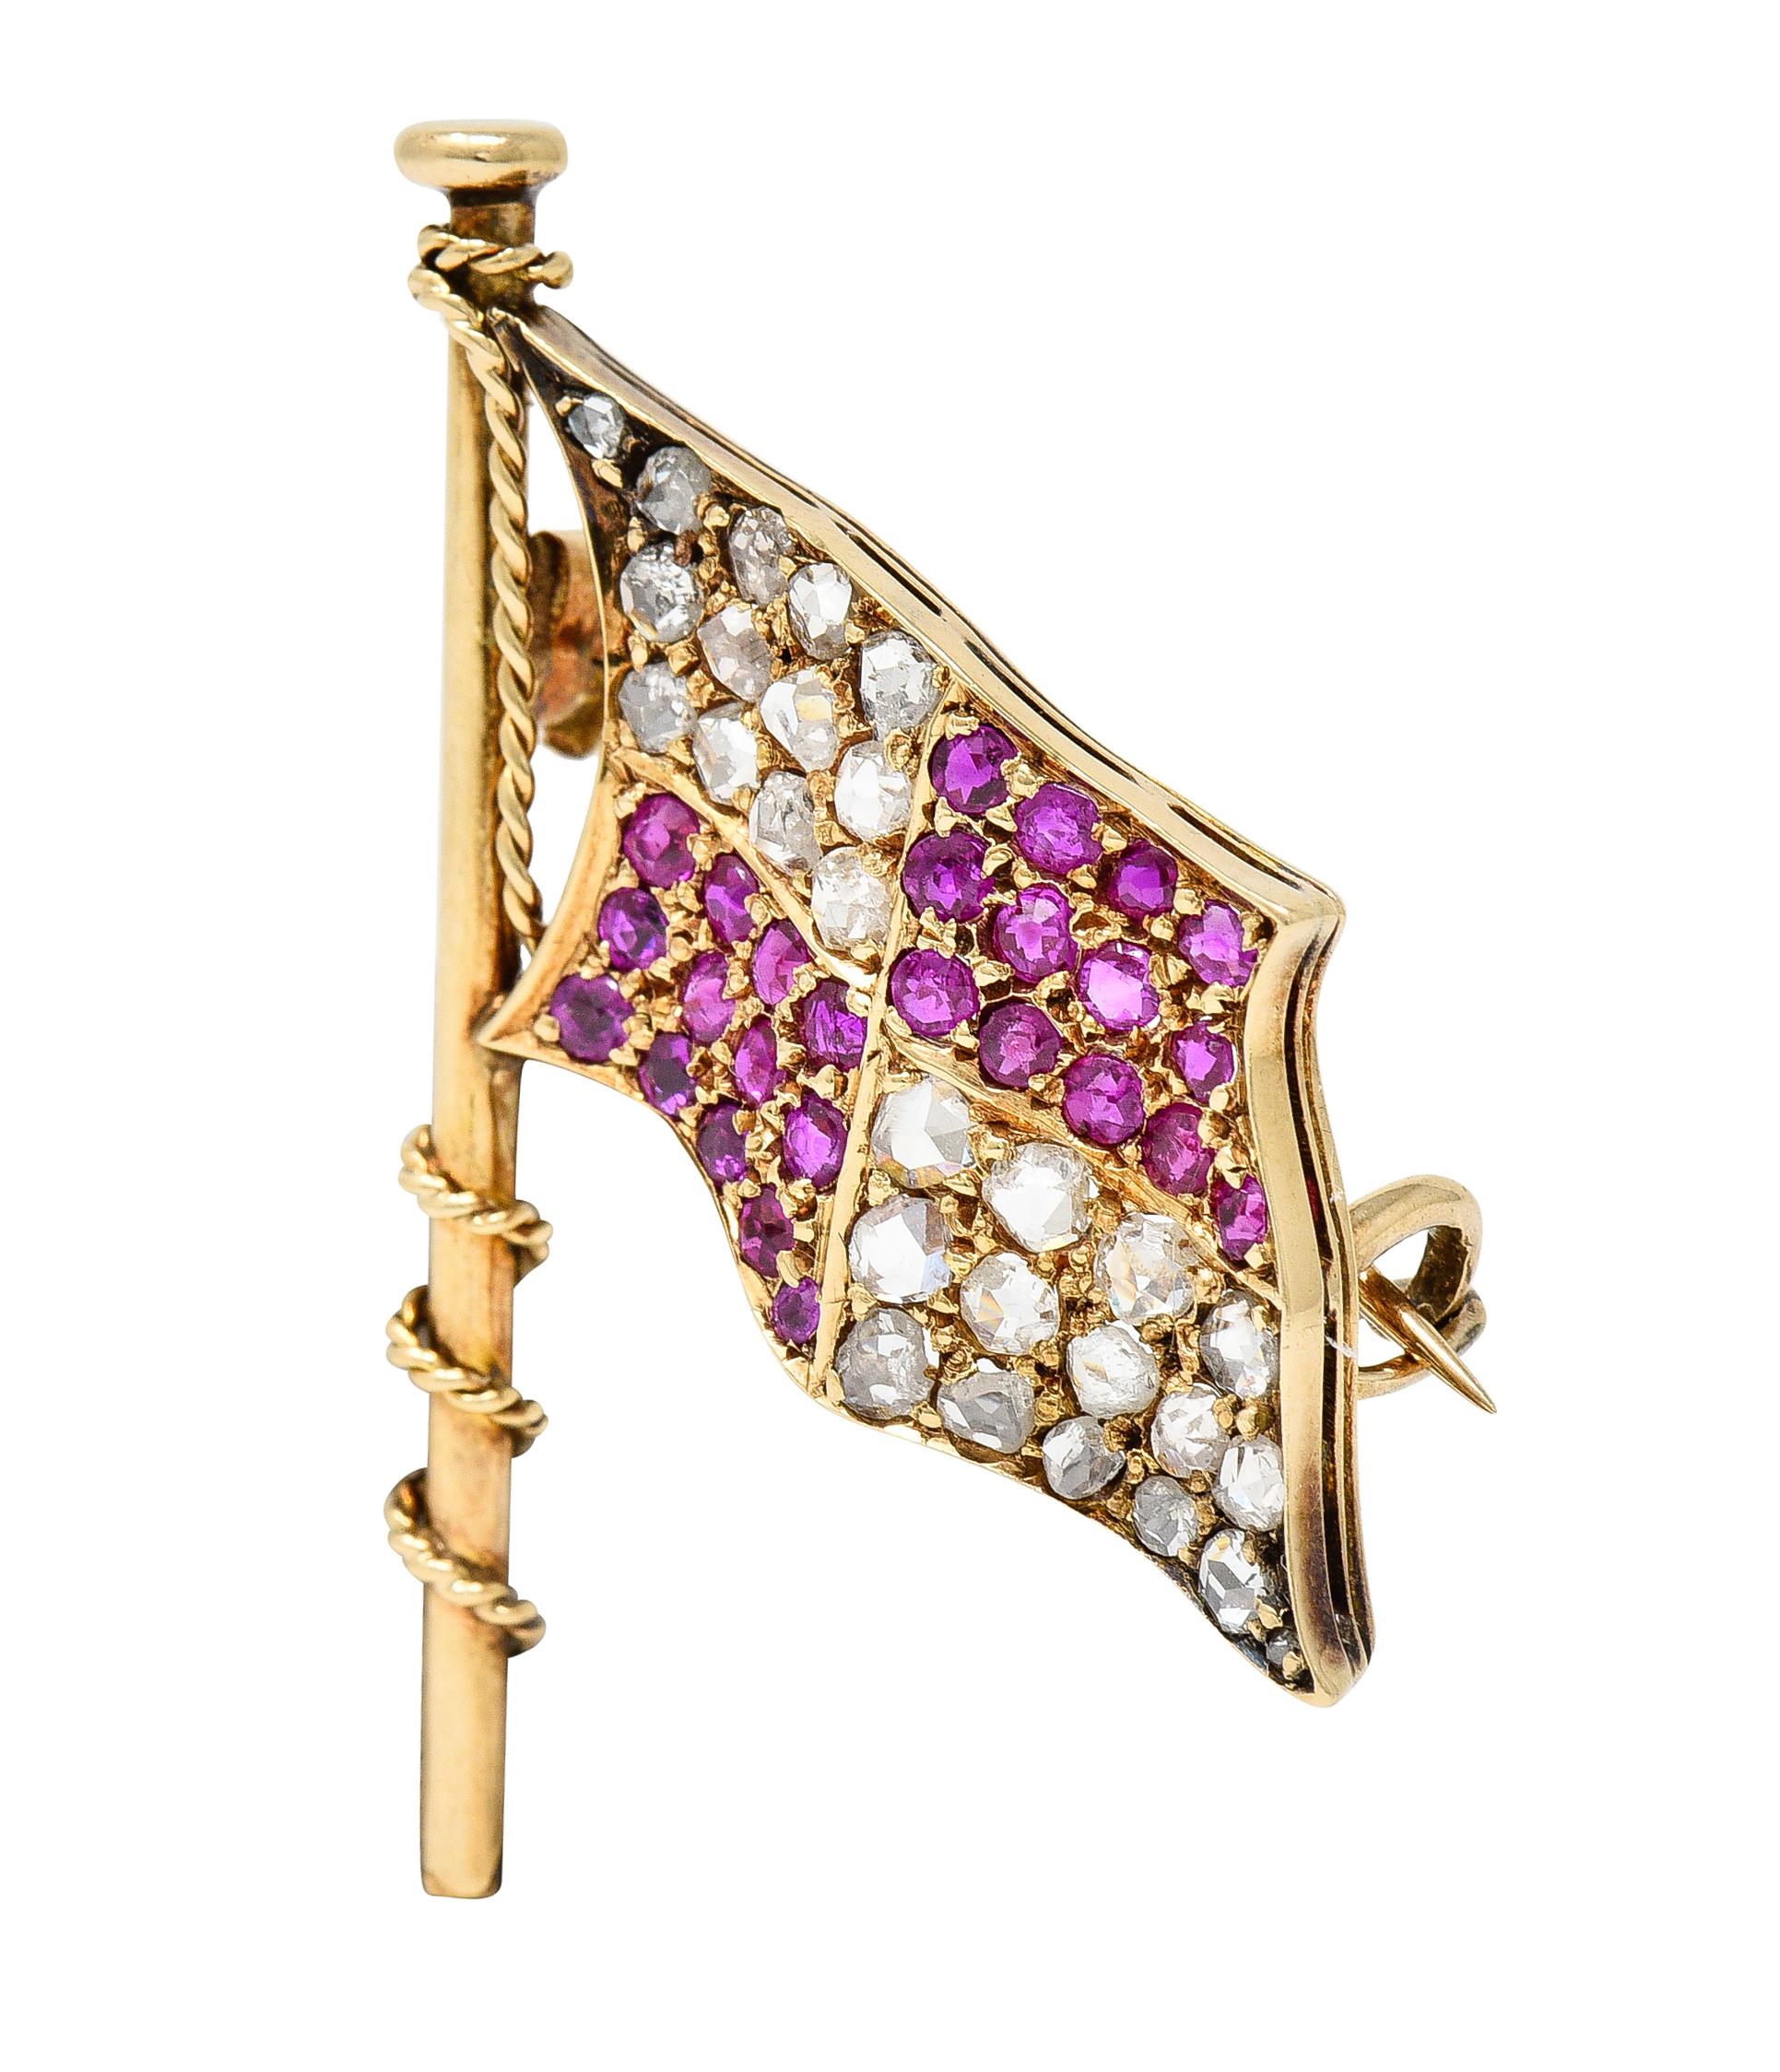 Designed as a flag hoisted on rope-wrapped flagpole and billowing
Featuring a checkered pattern comprised of rubies and diamonds
Rubies are round cut and weigh approximately 1.12 carats total 
Transparent medium purplish-red in color - bead